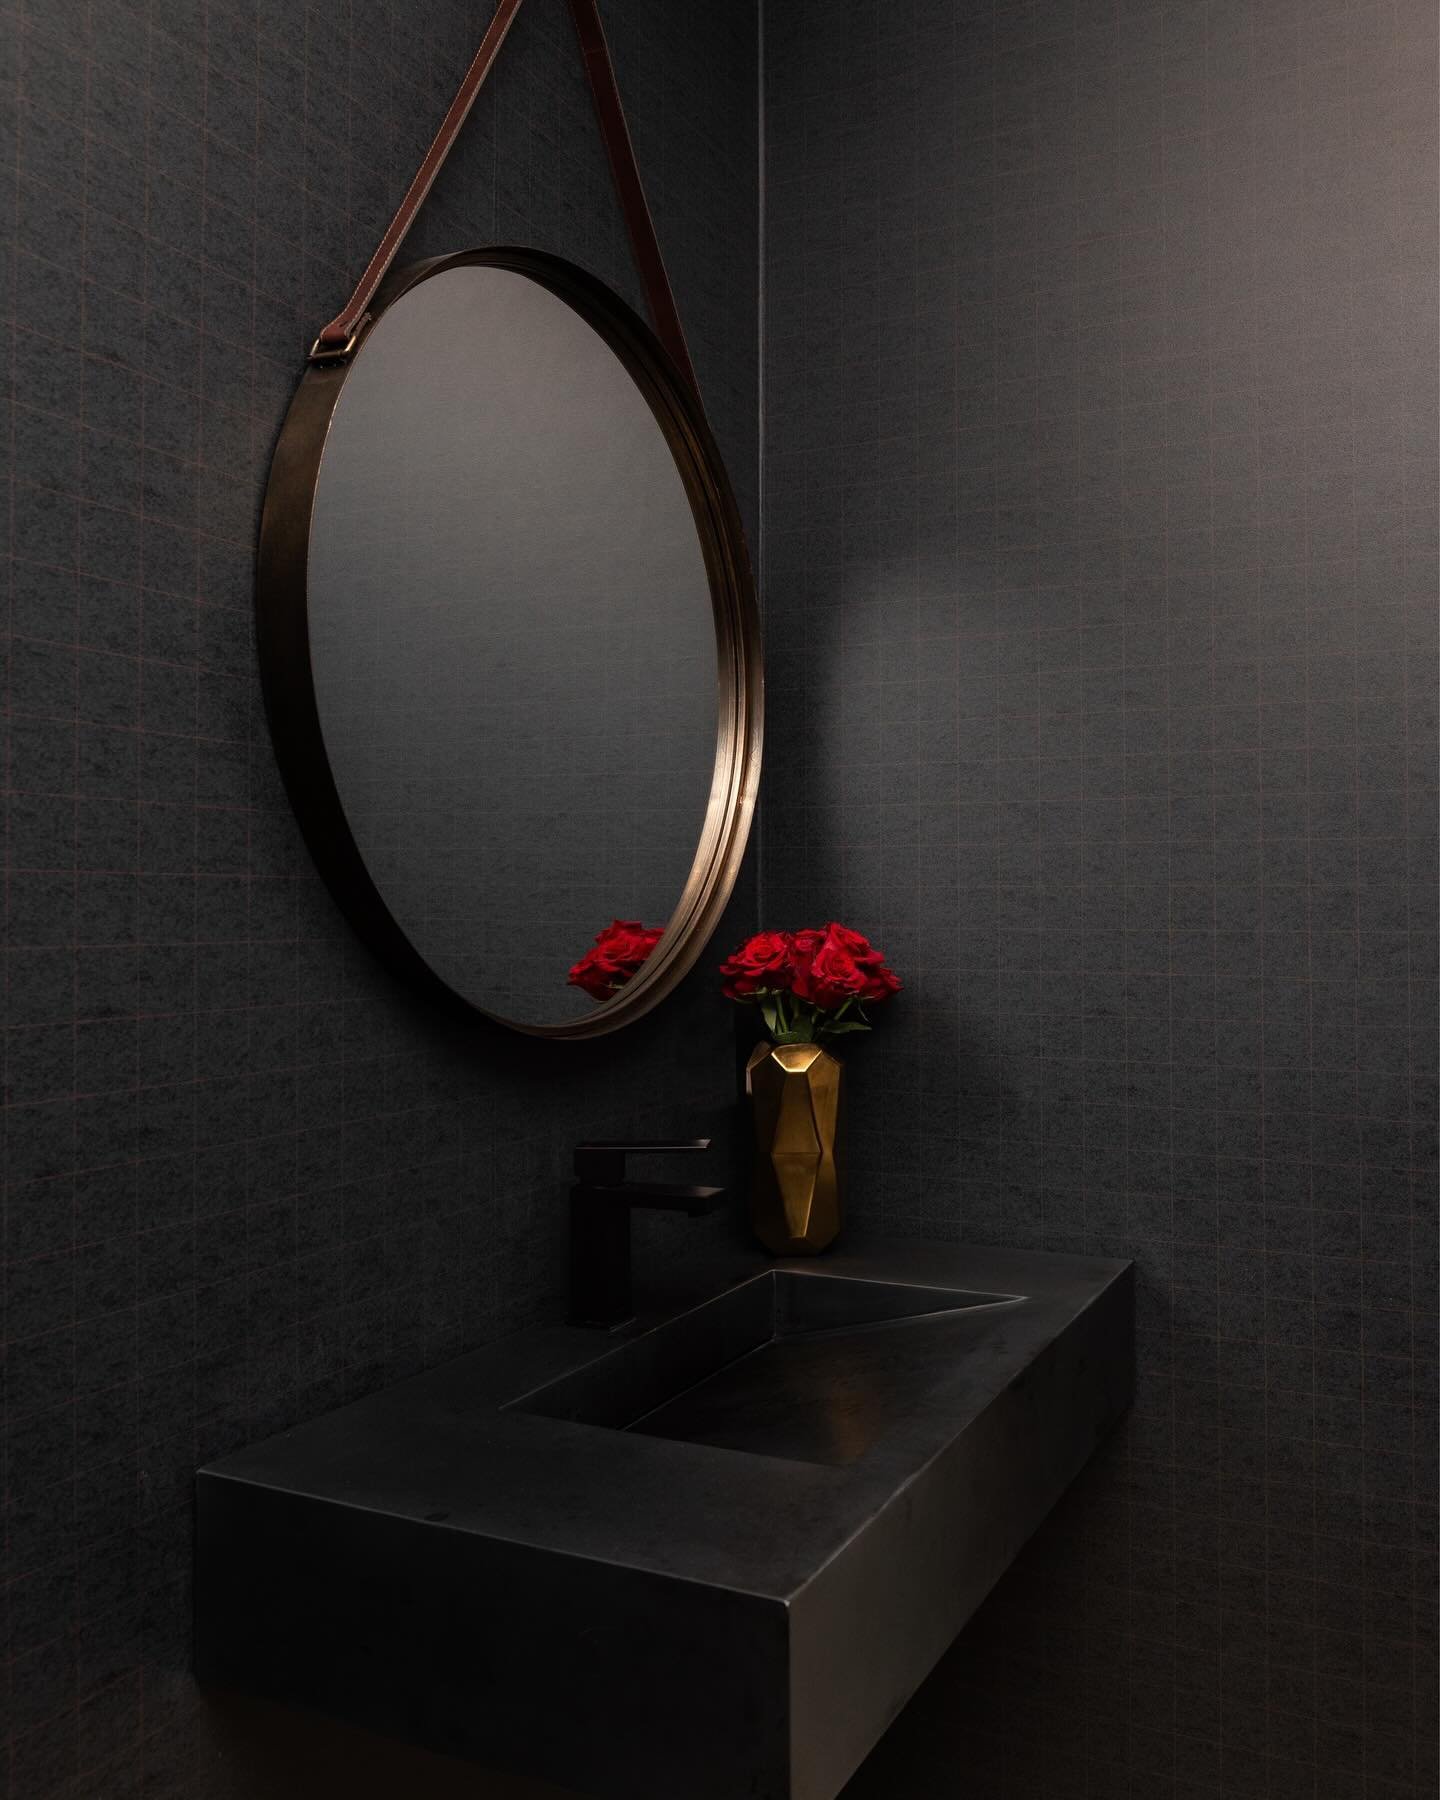 Step into our world of moody powder rooms! 

From deep hues to dramatic wallpaper, we&rsquo;re all about making a statement in every corner. 

Share your favorite powder room vibes with us!

#MoodyPowderRooms #ExpressYourStyle #TeelaBennettDesign #In